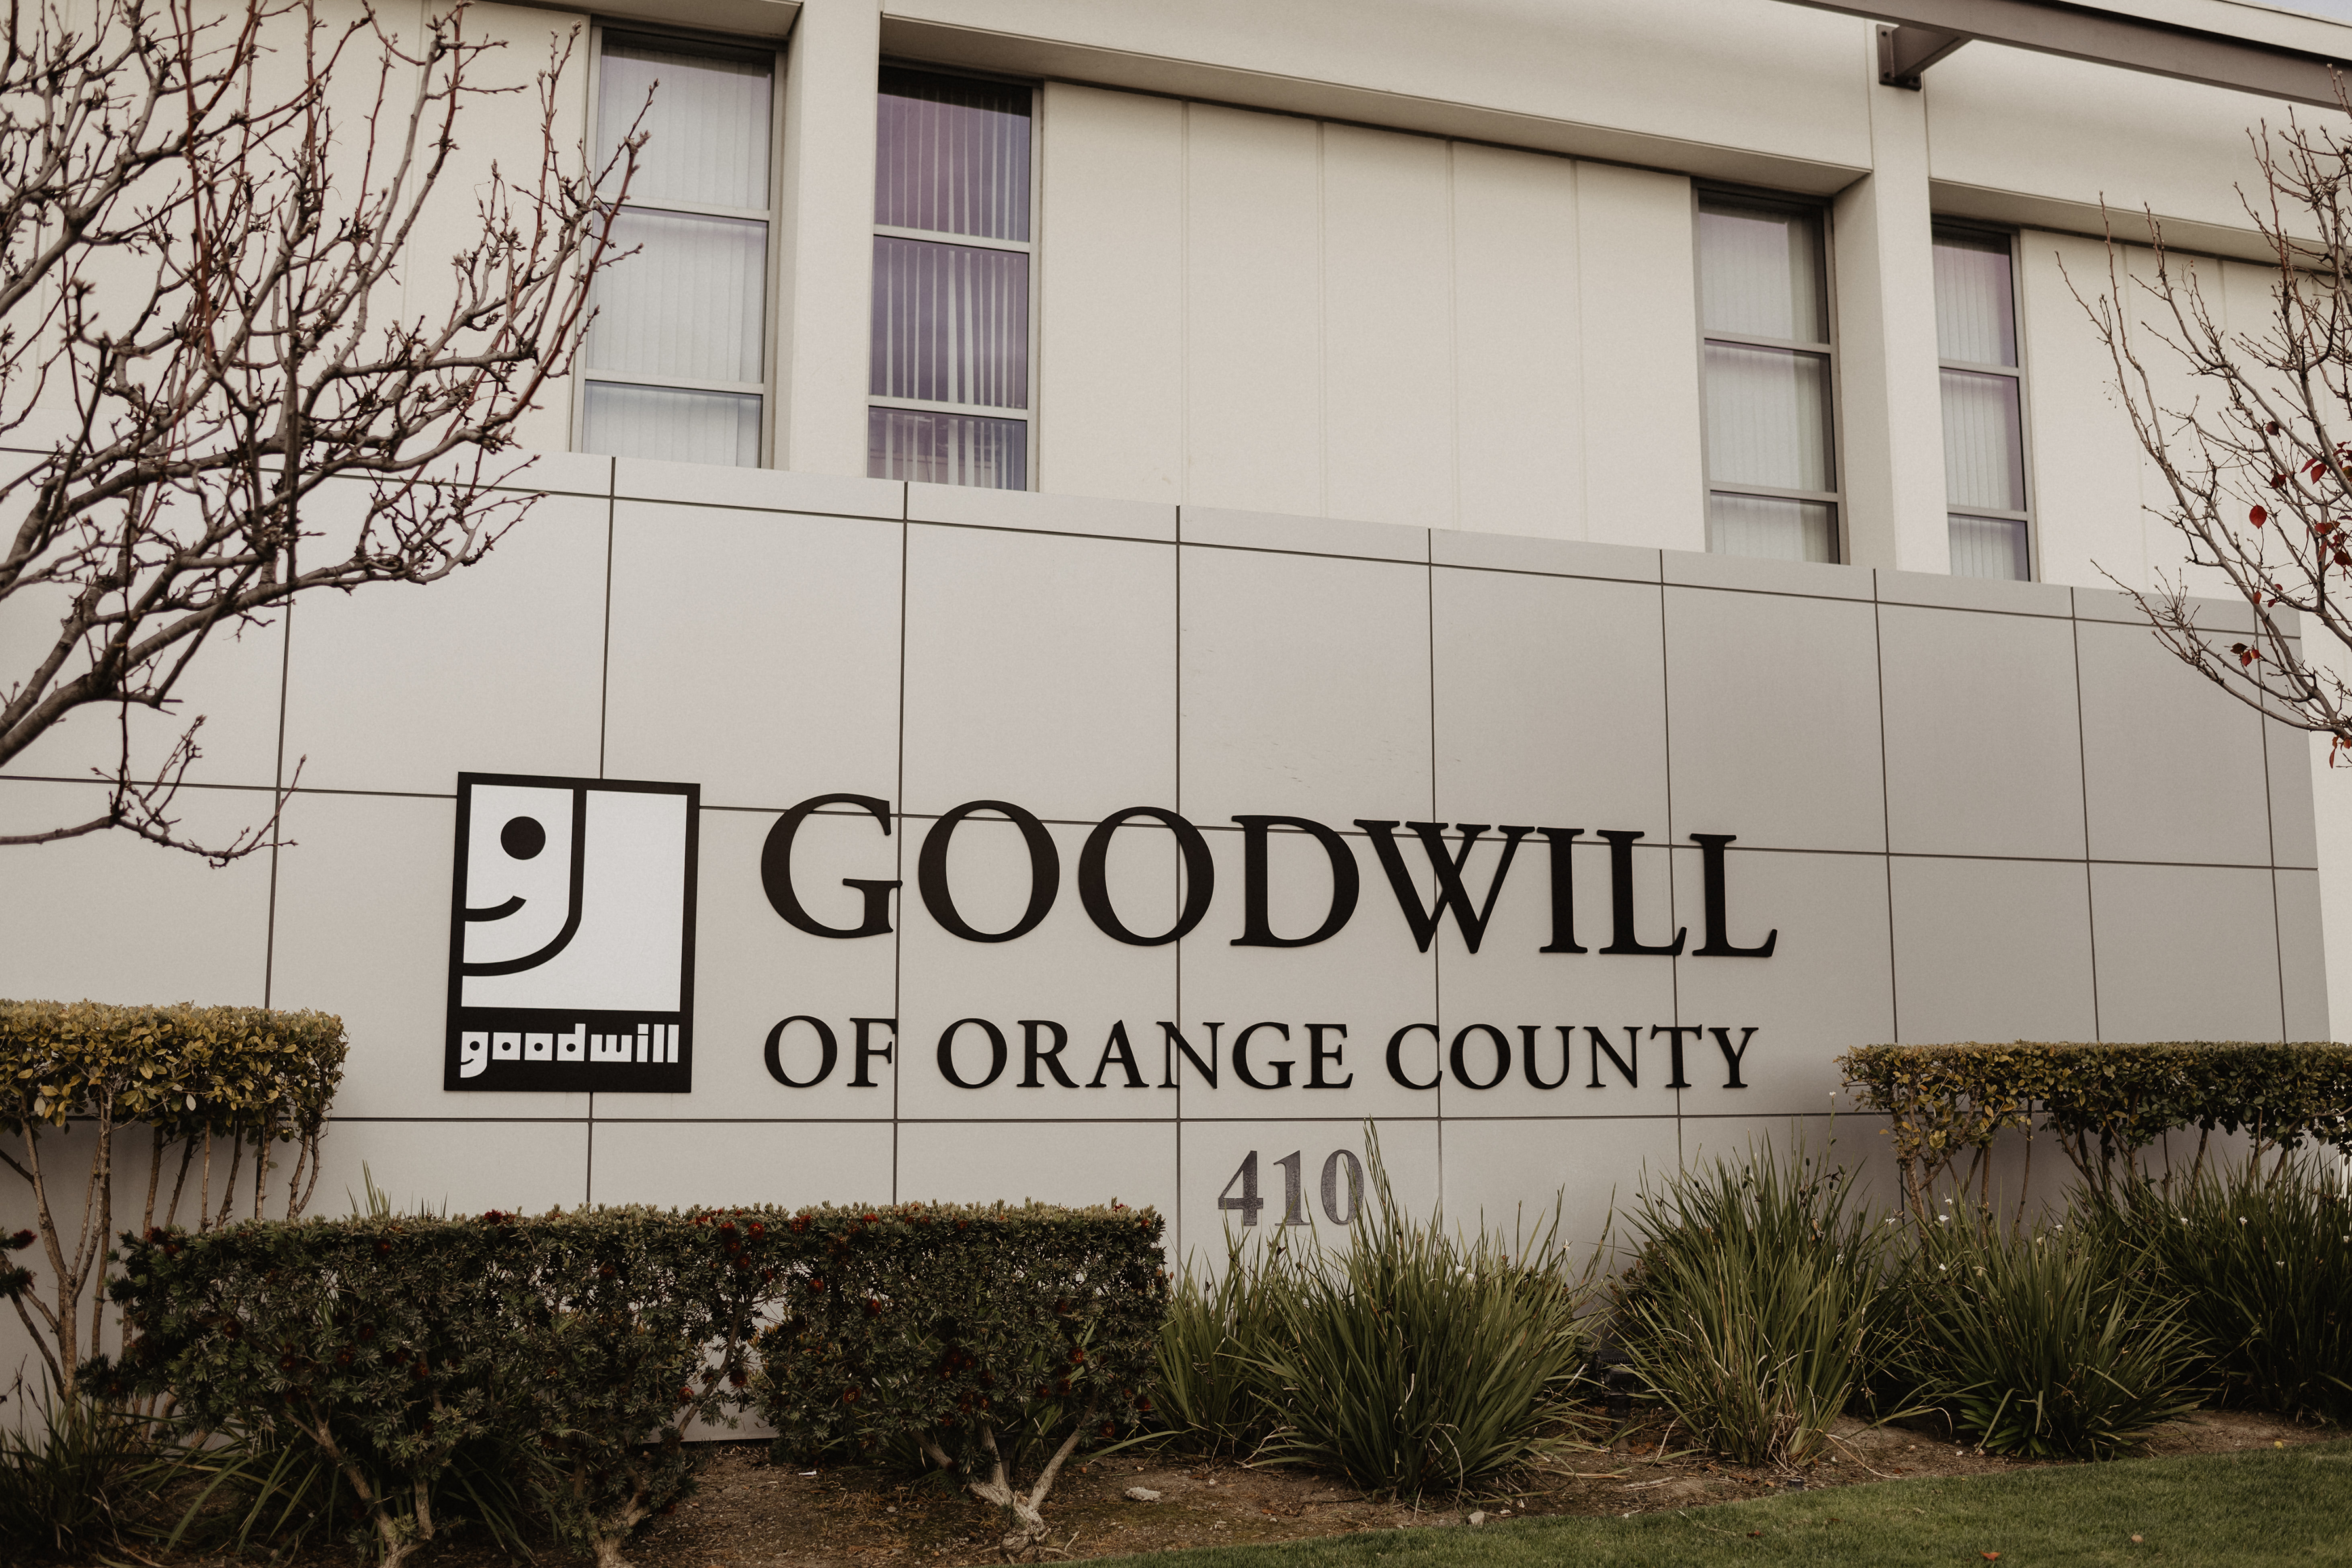 exterior view of goodwill of orange country building